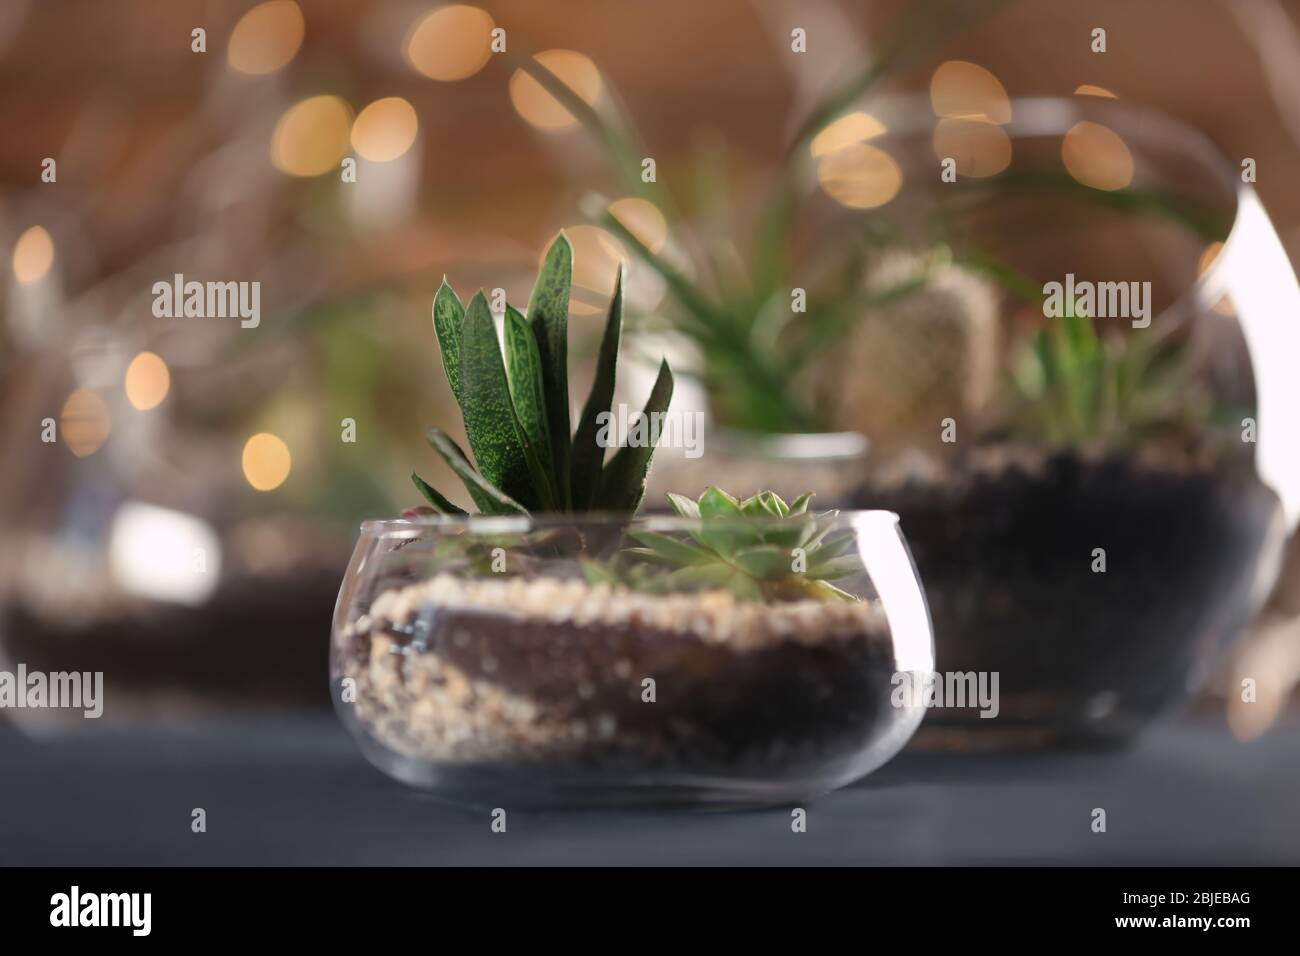 Florarium with succulents on wooden table Stock Photo